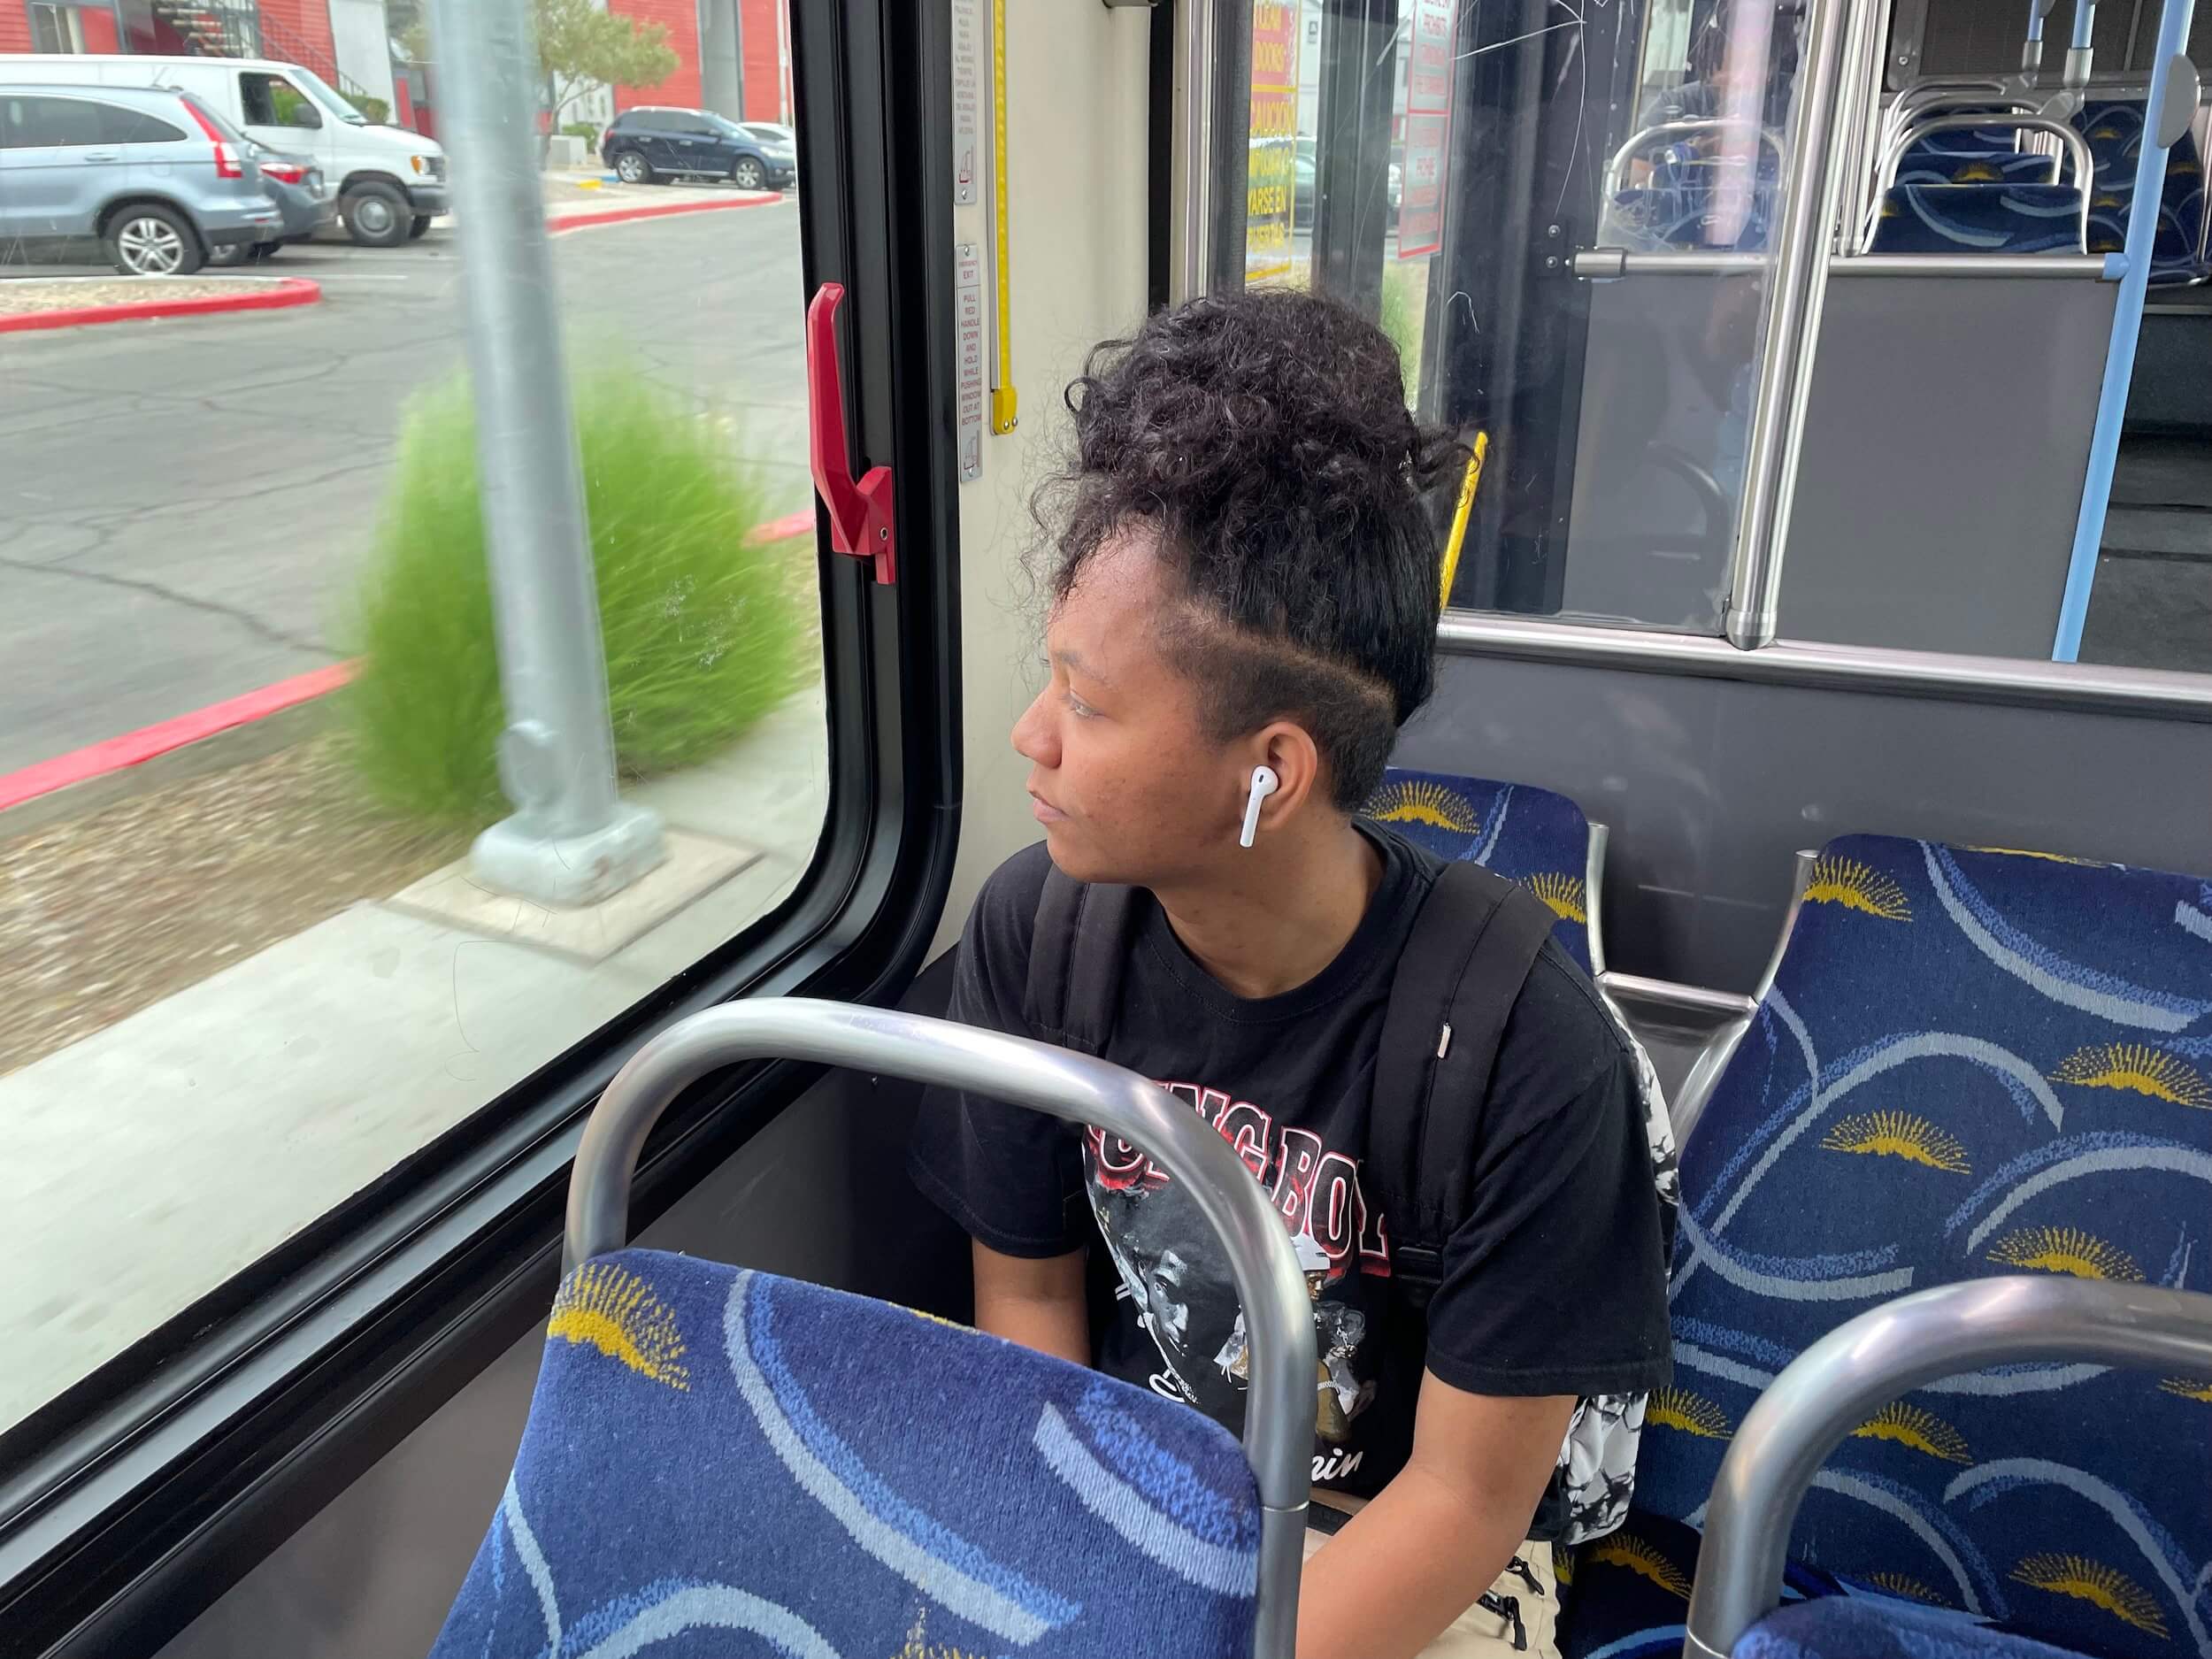 A student sits on a bus looking out the window